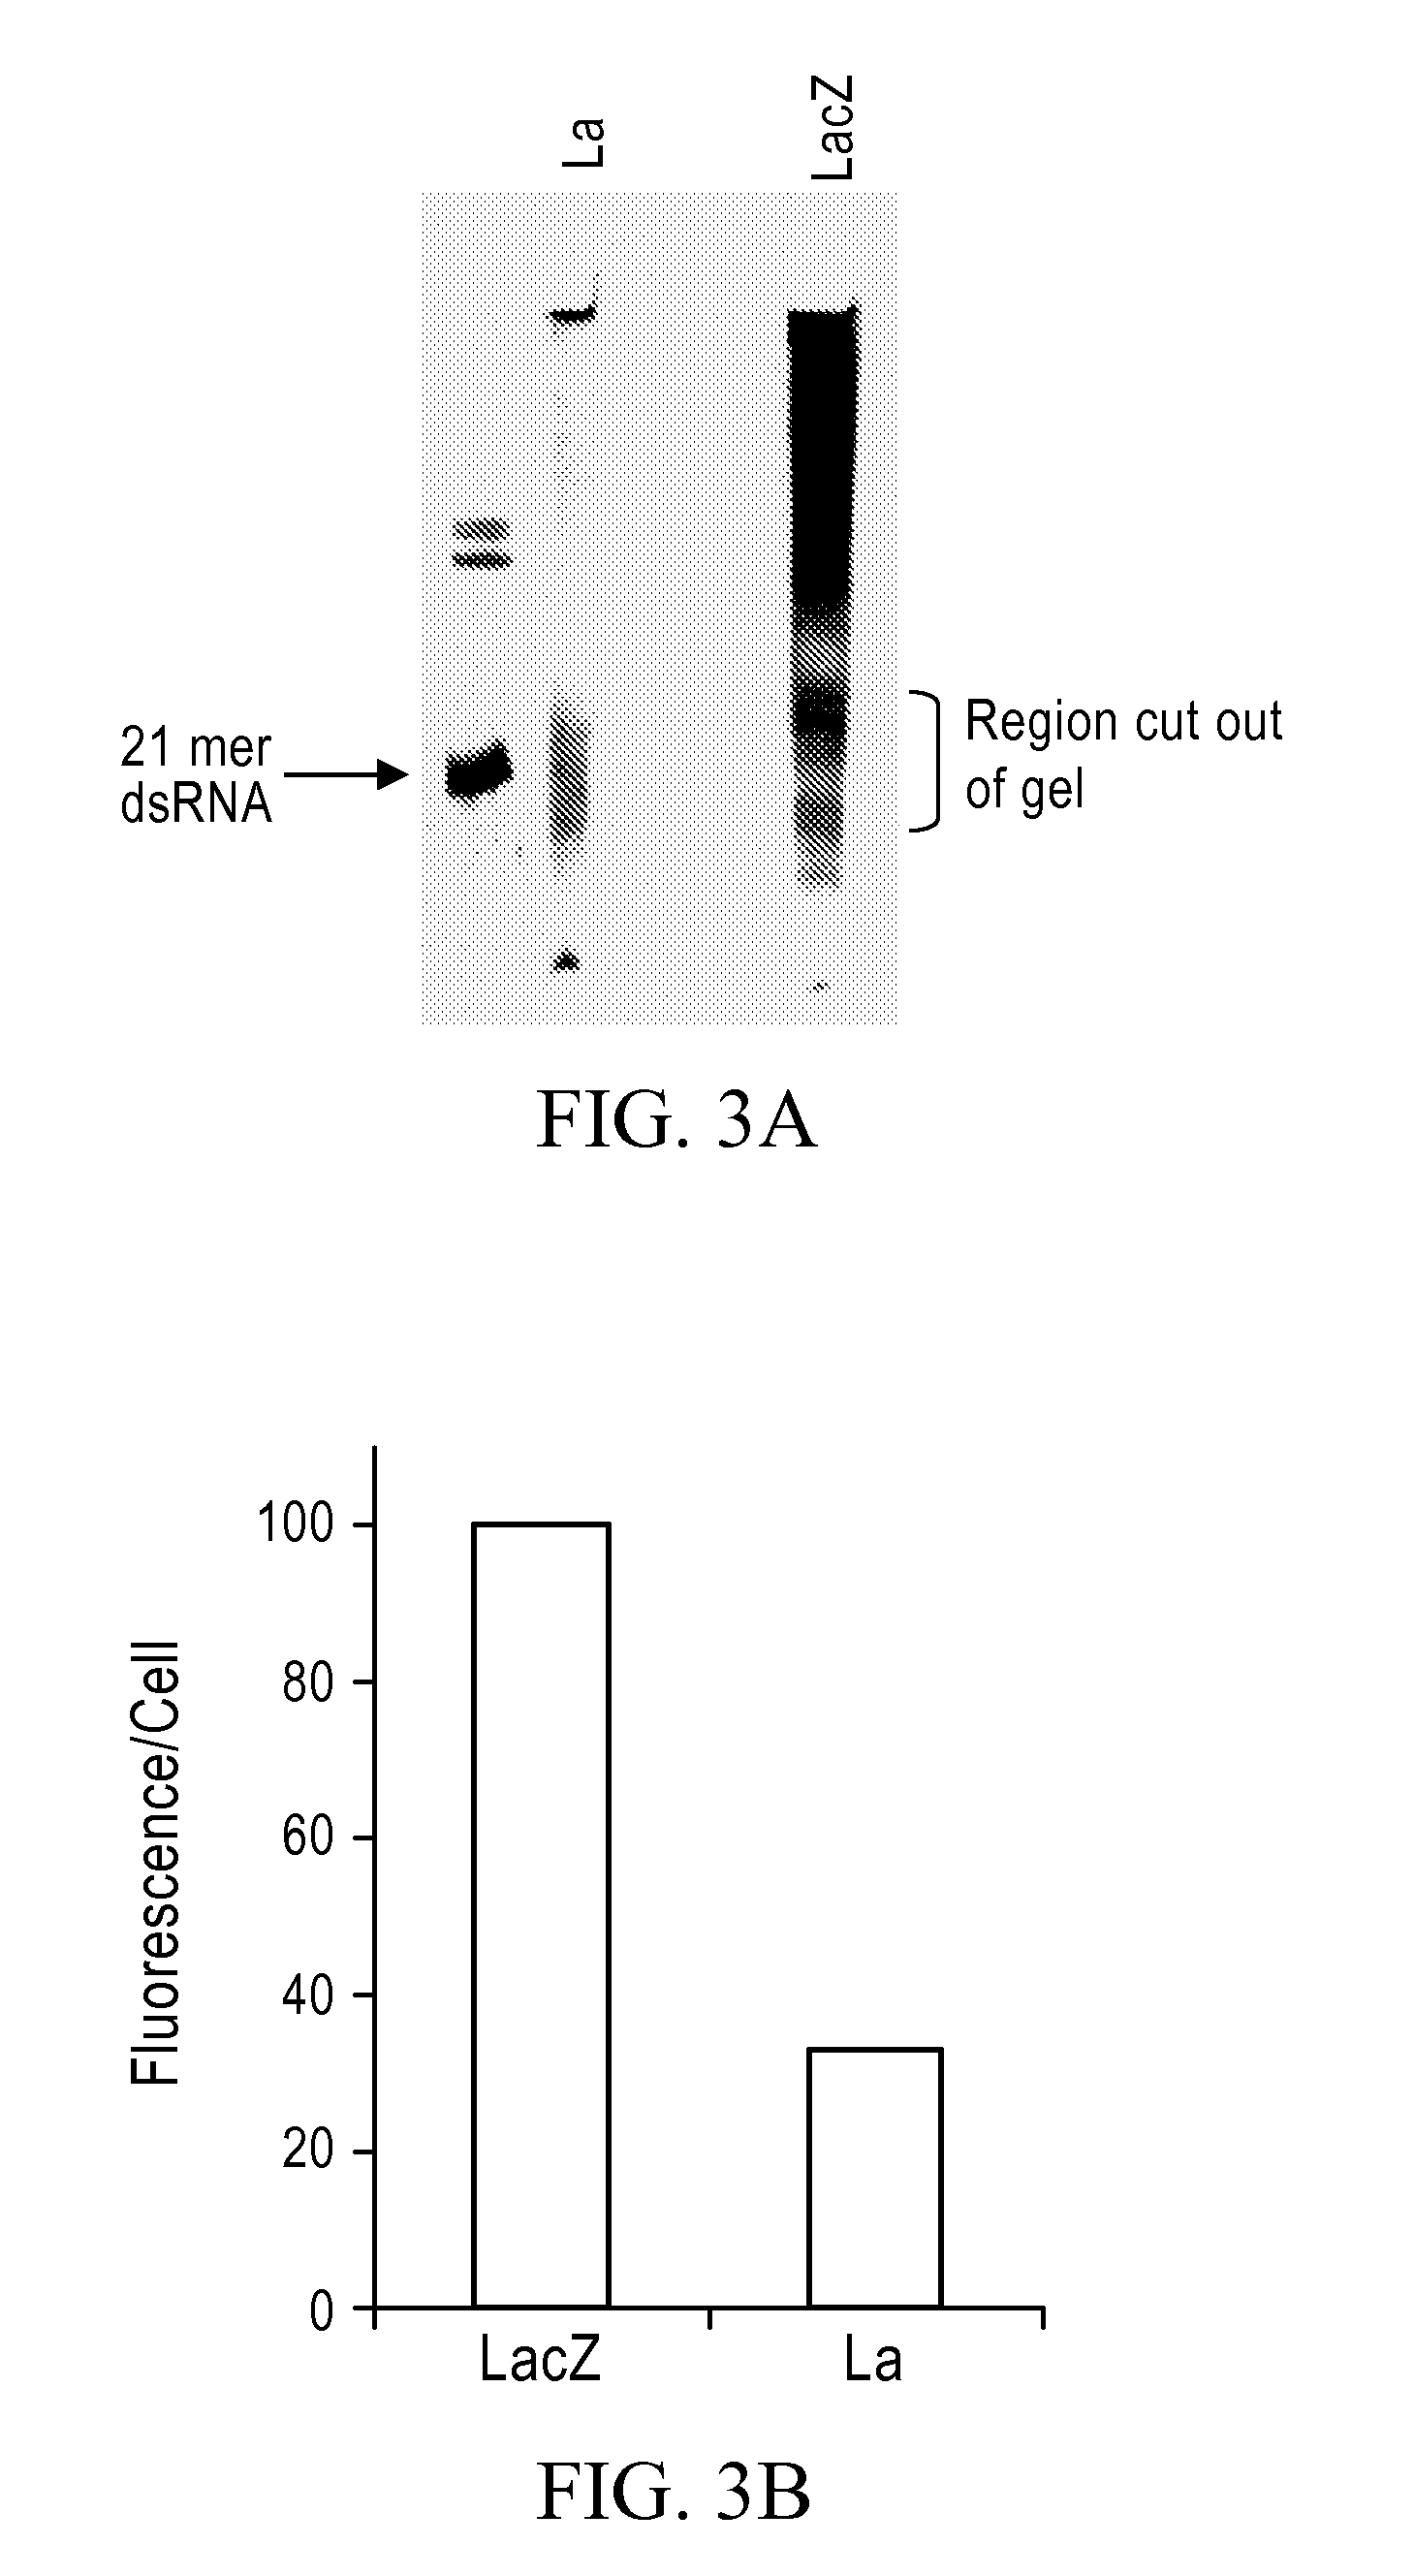 Methods and compositions relating to polypeptides with rnase iii domains that mediate RNA interference